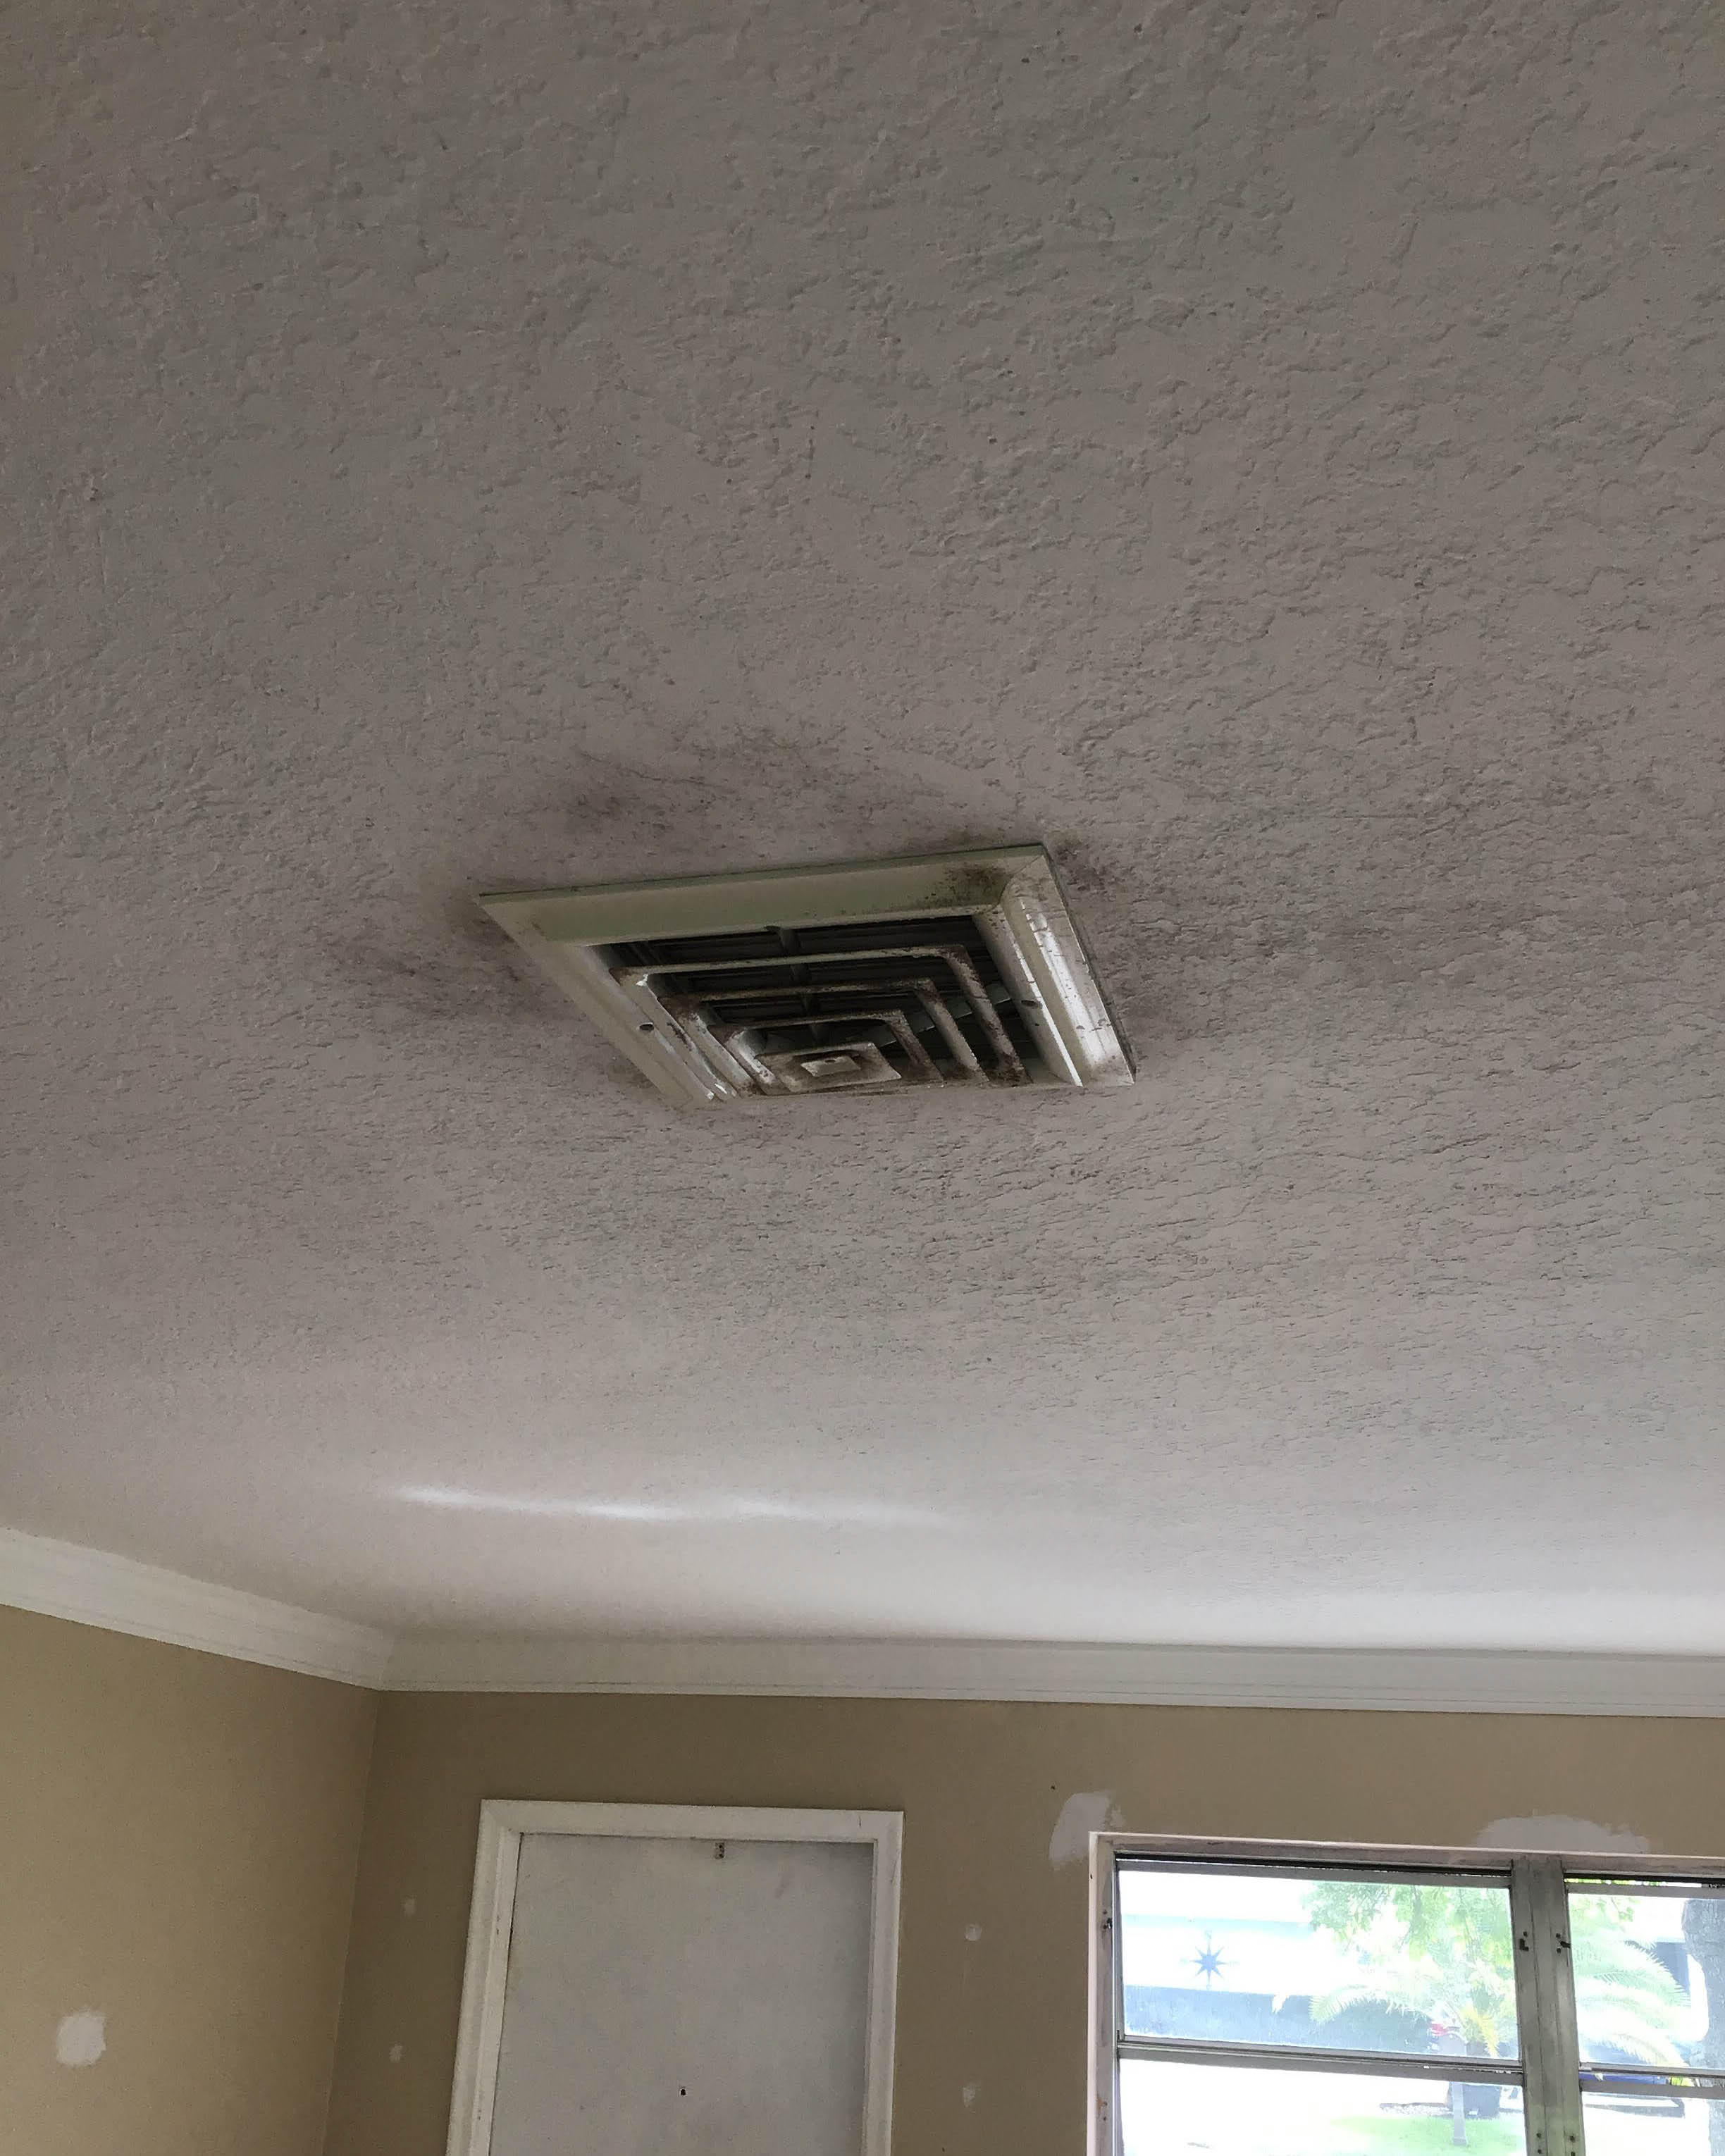 You can rely on SERVPRO of Delray Beach for all of your mold damage cleanup and remediation needs in Highland Beach, FL. Give us a call!